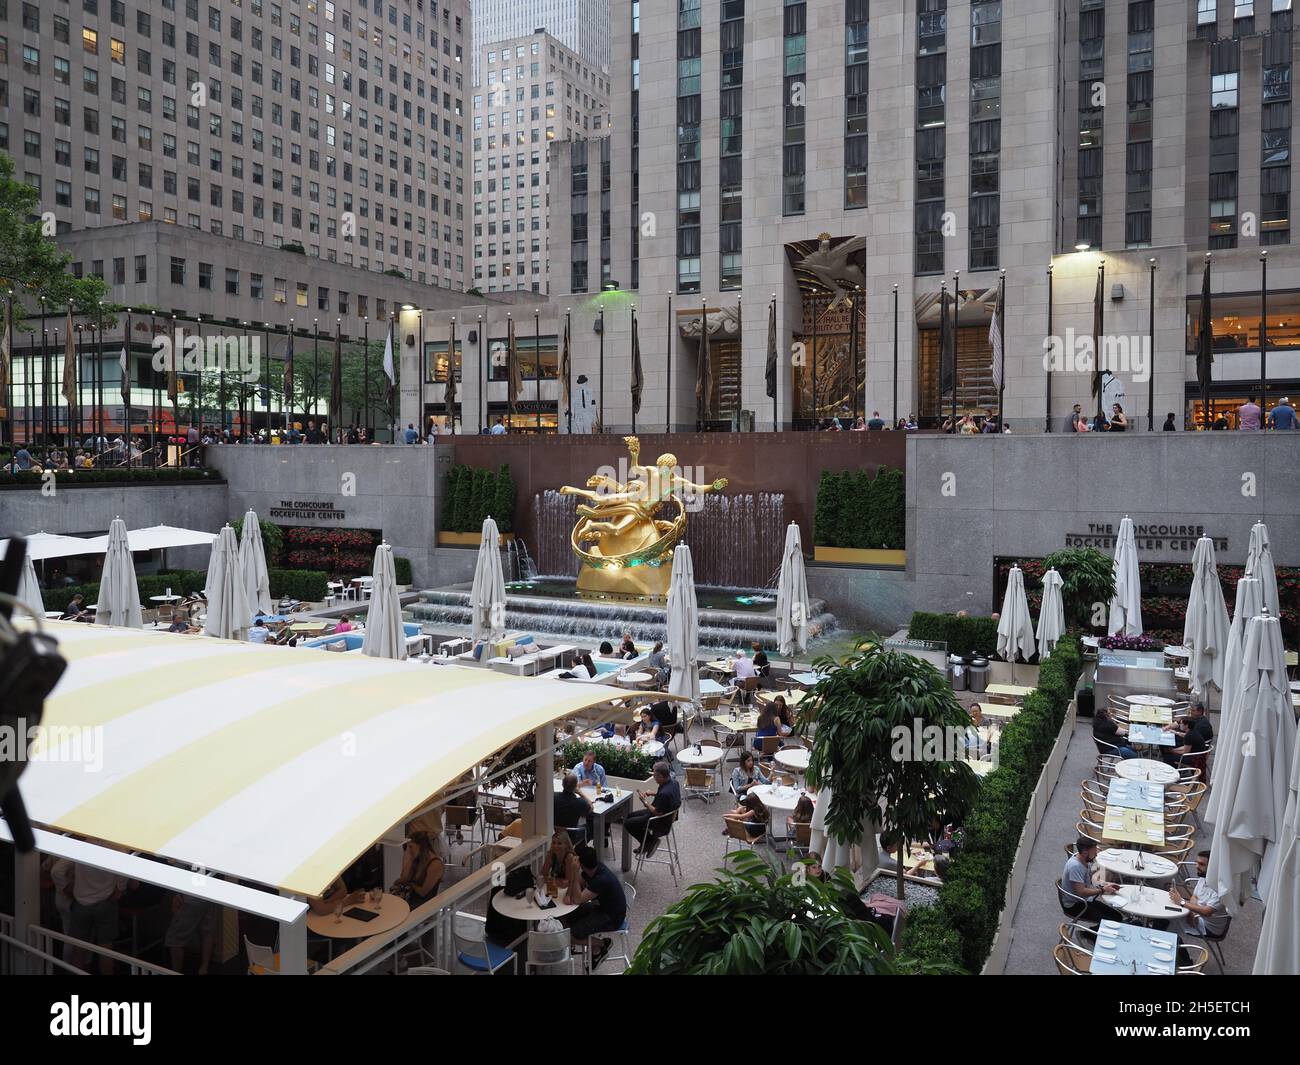 Image of The Concourse of the Rockefeller Center. Stock Photo